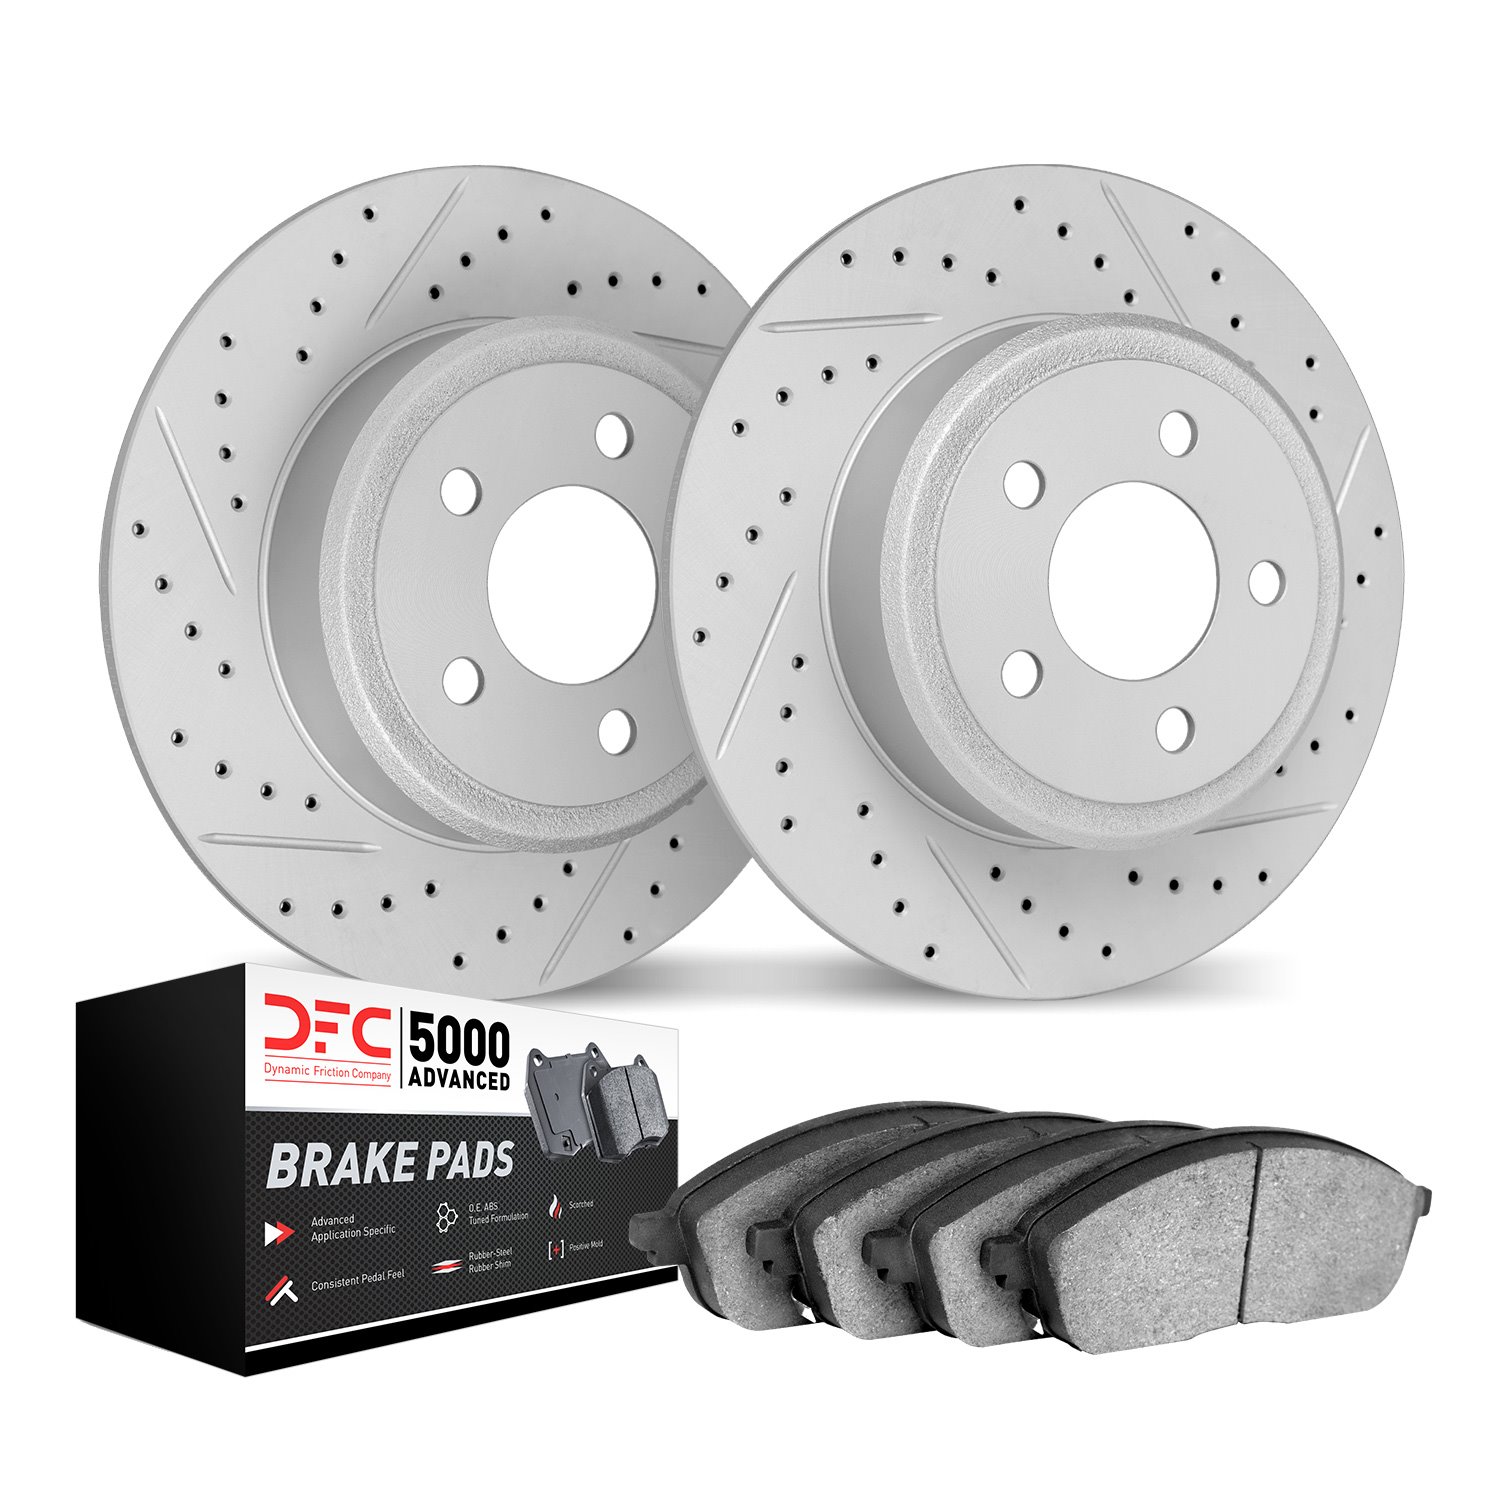 2502-76058 Geoperformance Drilled/Slotted Rotors w/5000 Advanced Brake Pads Kit, Fits Select Lexus/Toyota/Scion, Position: Rear